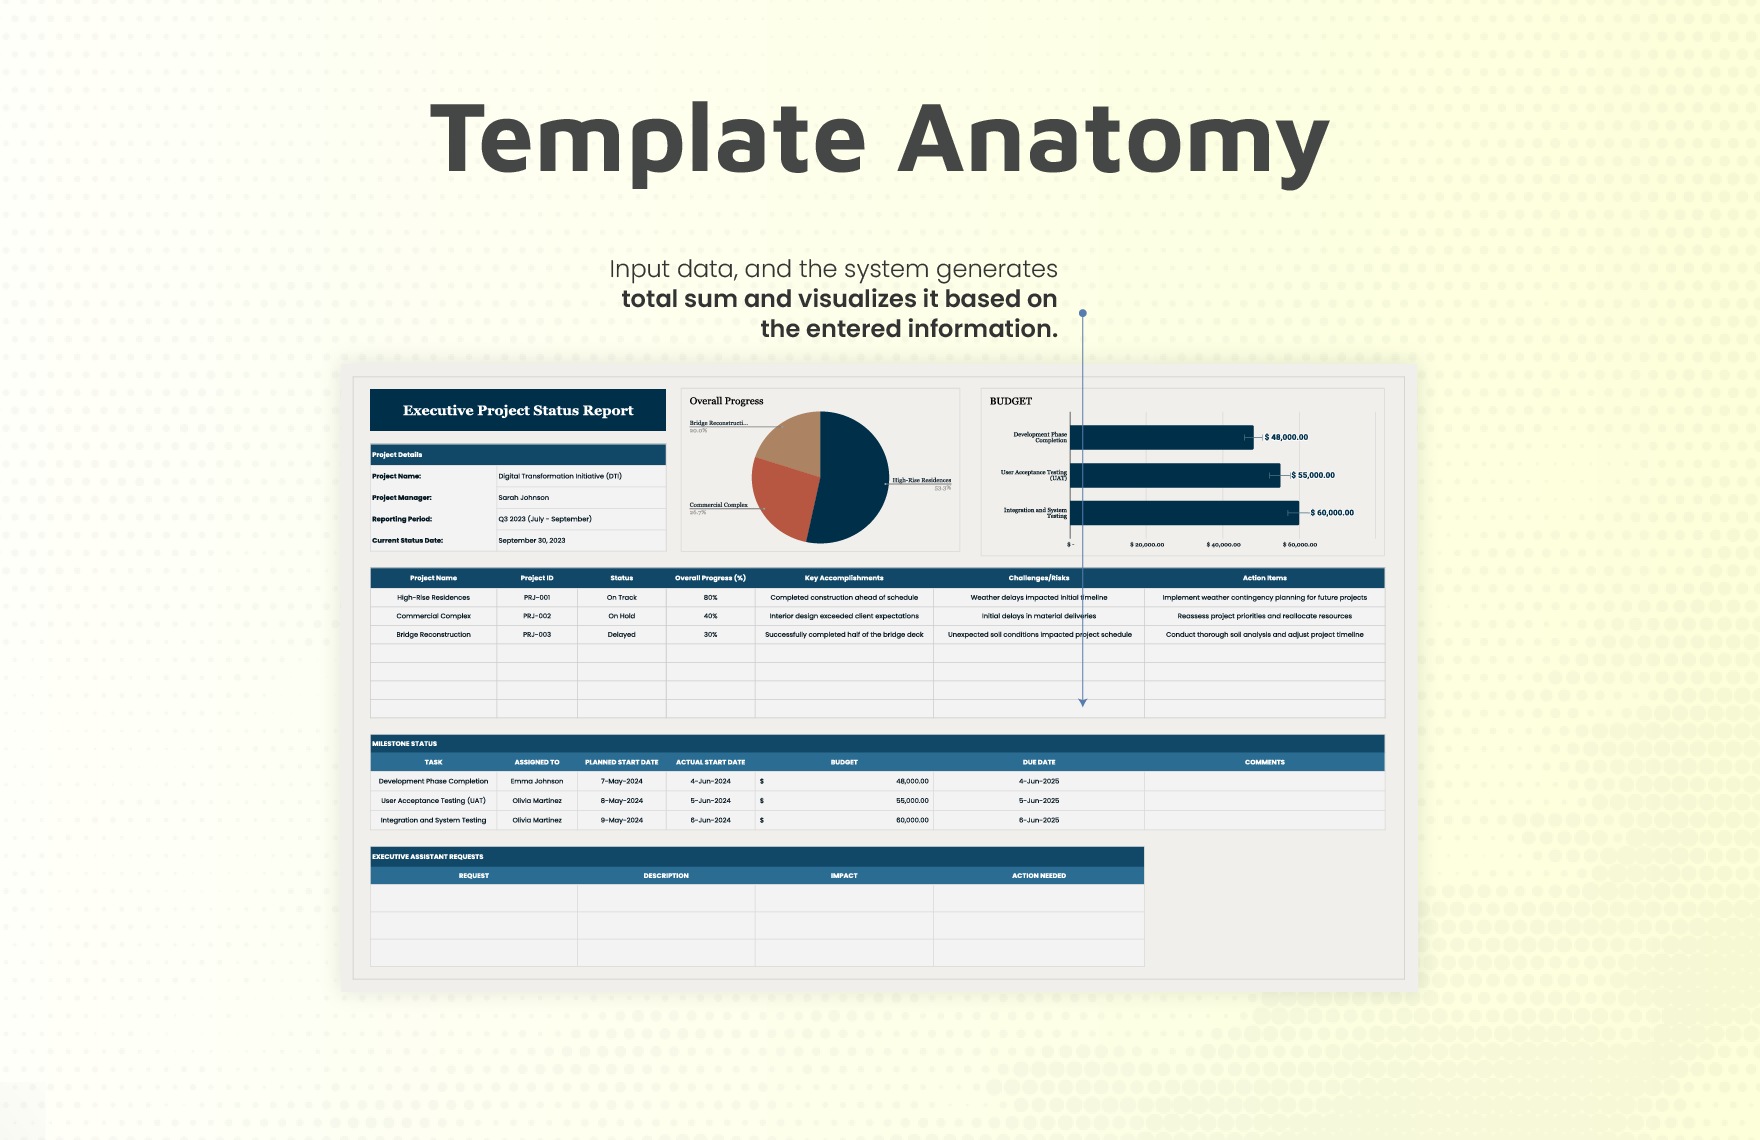 Executive Project Status Report Template